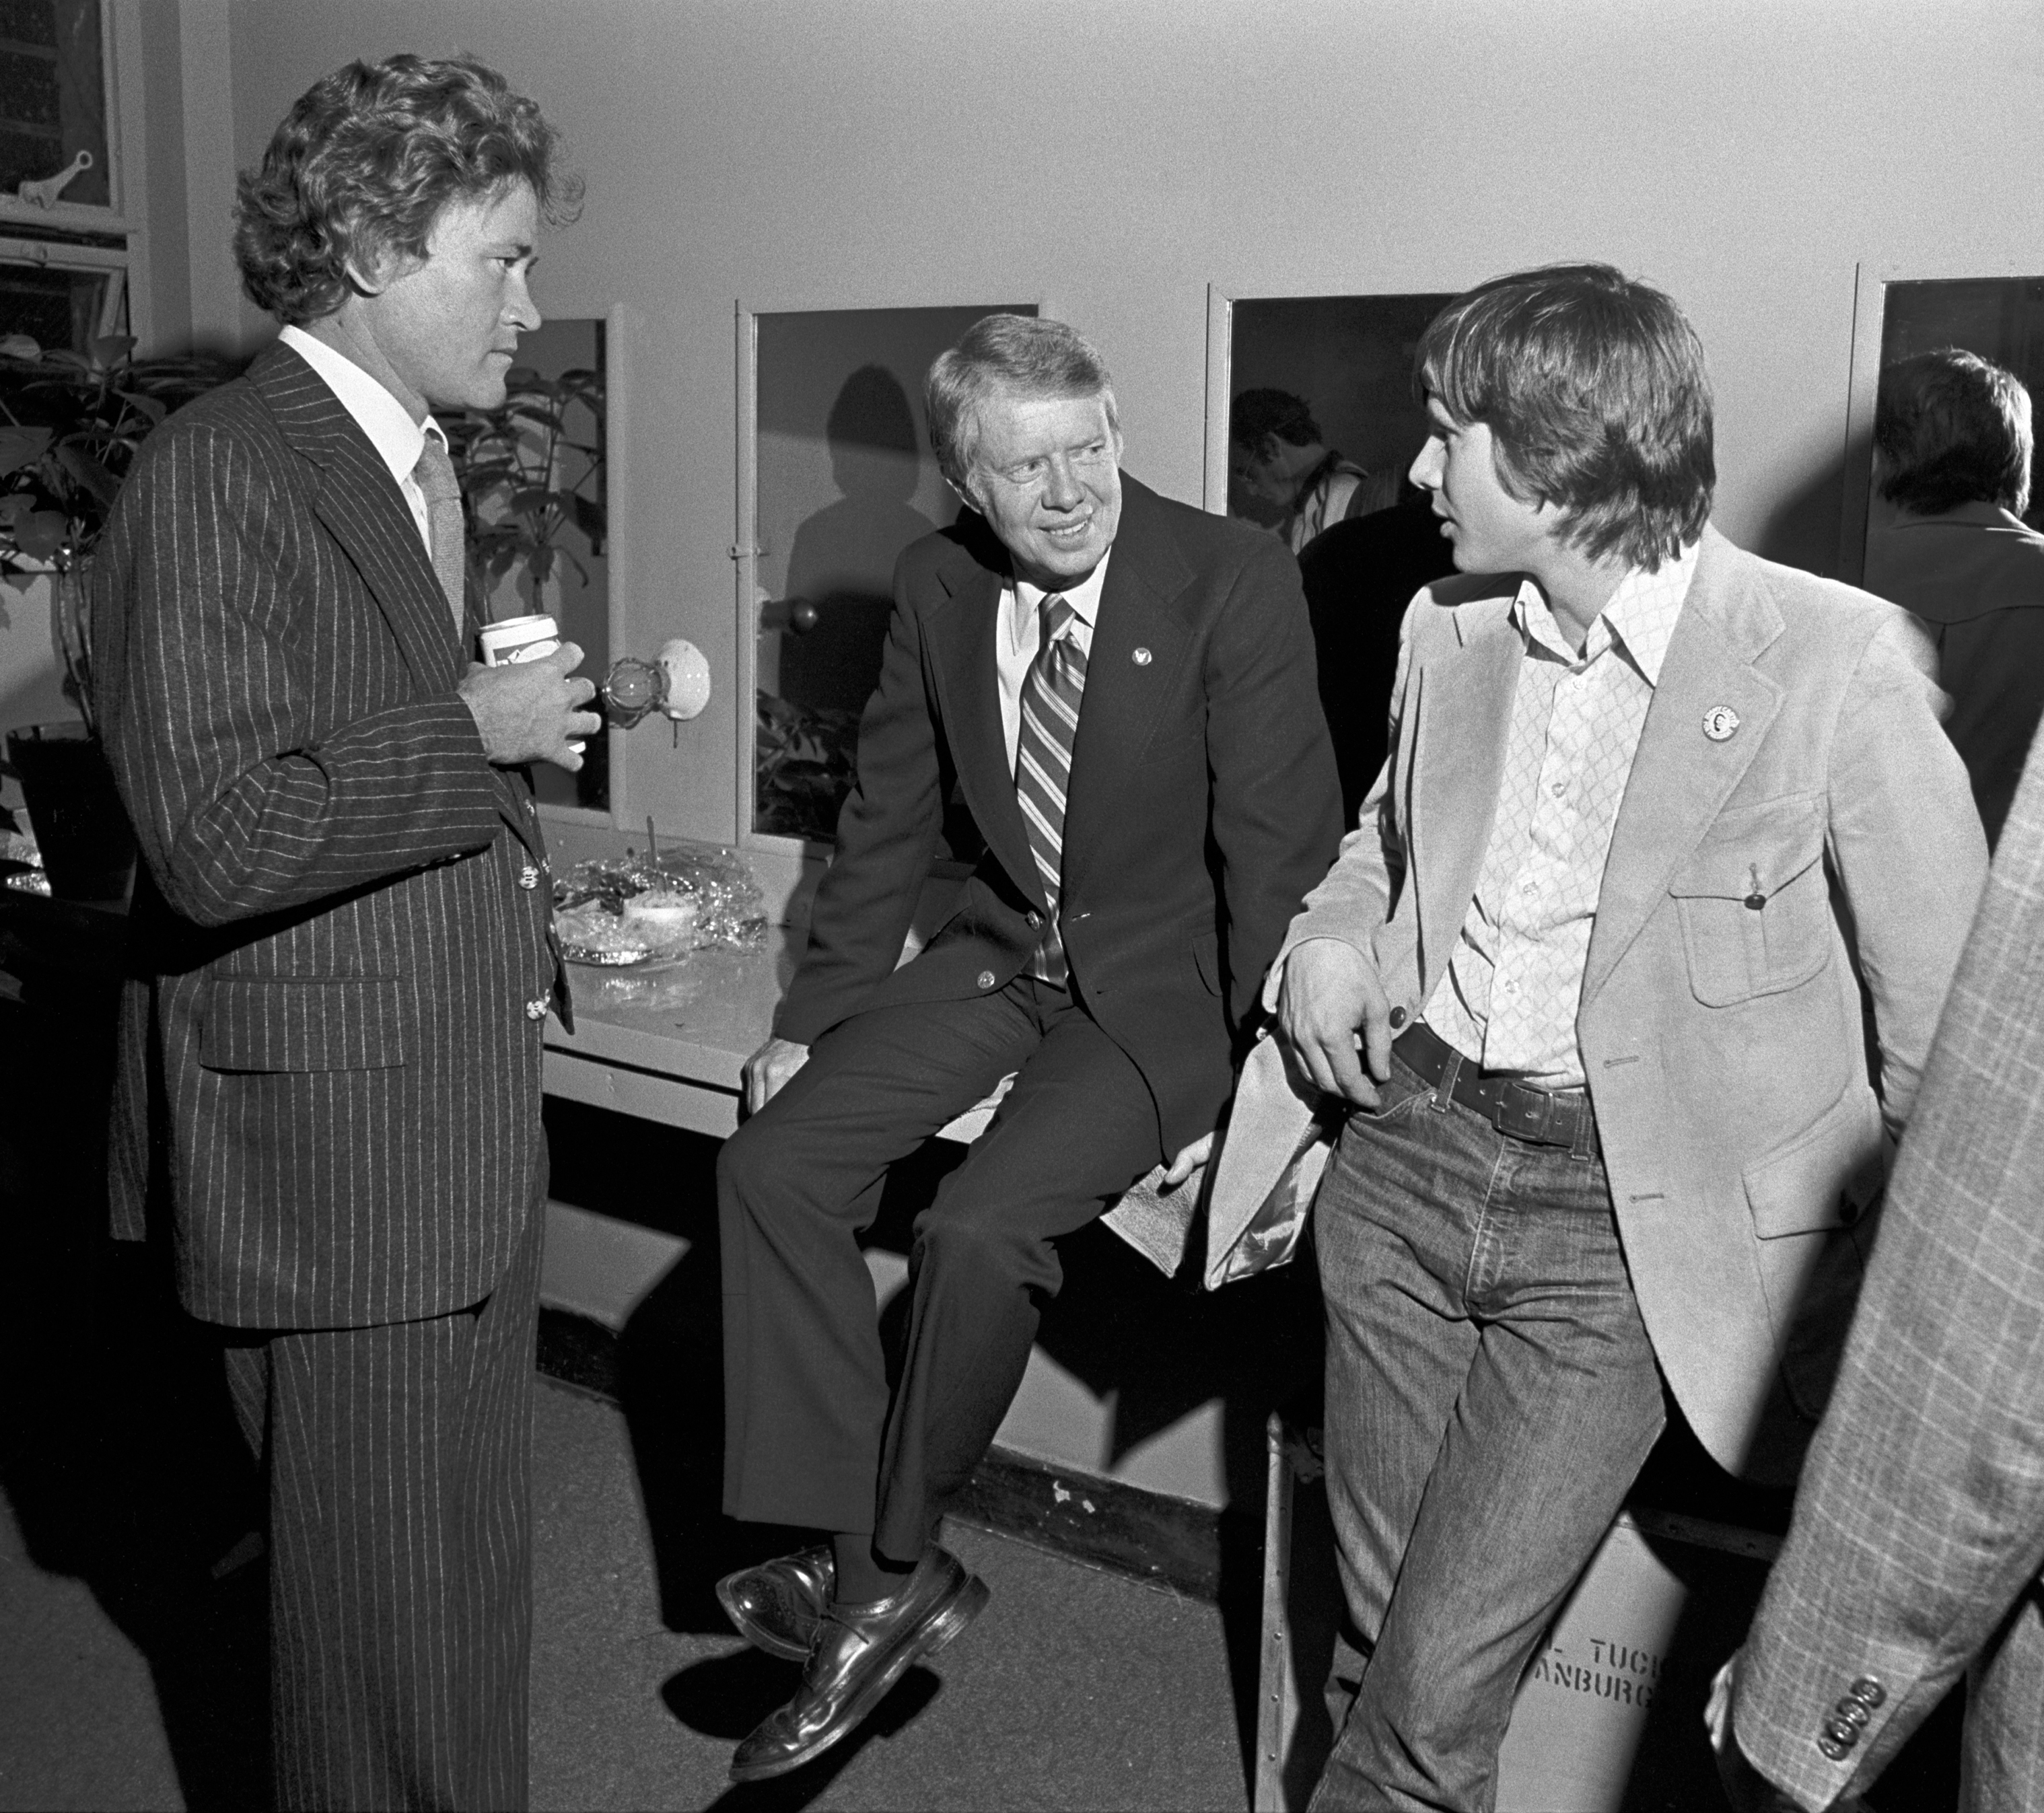 Phil Walden with Jimmy and Chip Carter in a dressing room after The Marshall Tucker Band benefit concert in Atlanta, Georgia on October 31, 1975 | Source: Getty Images